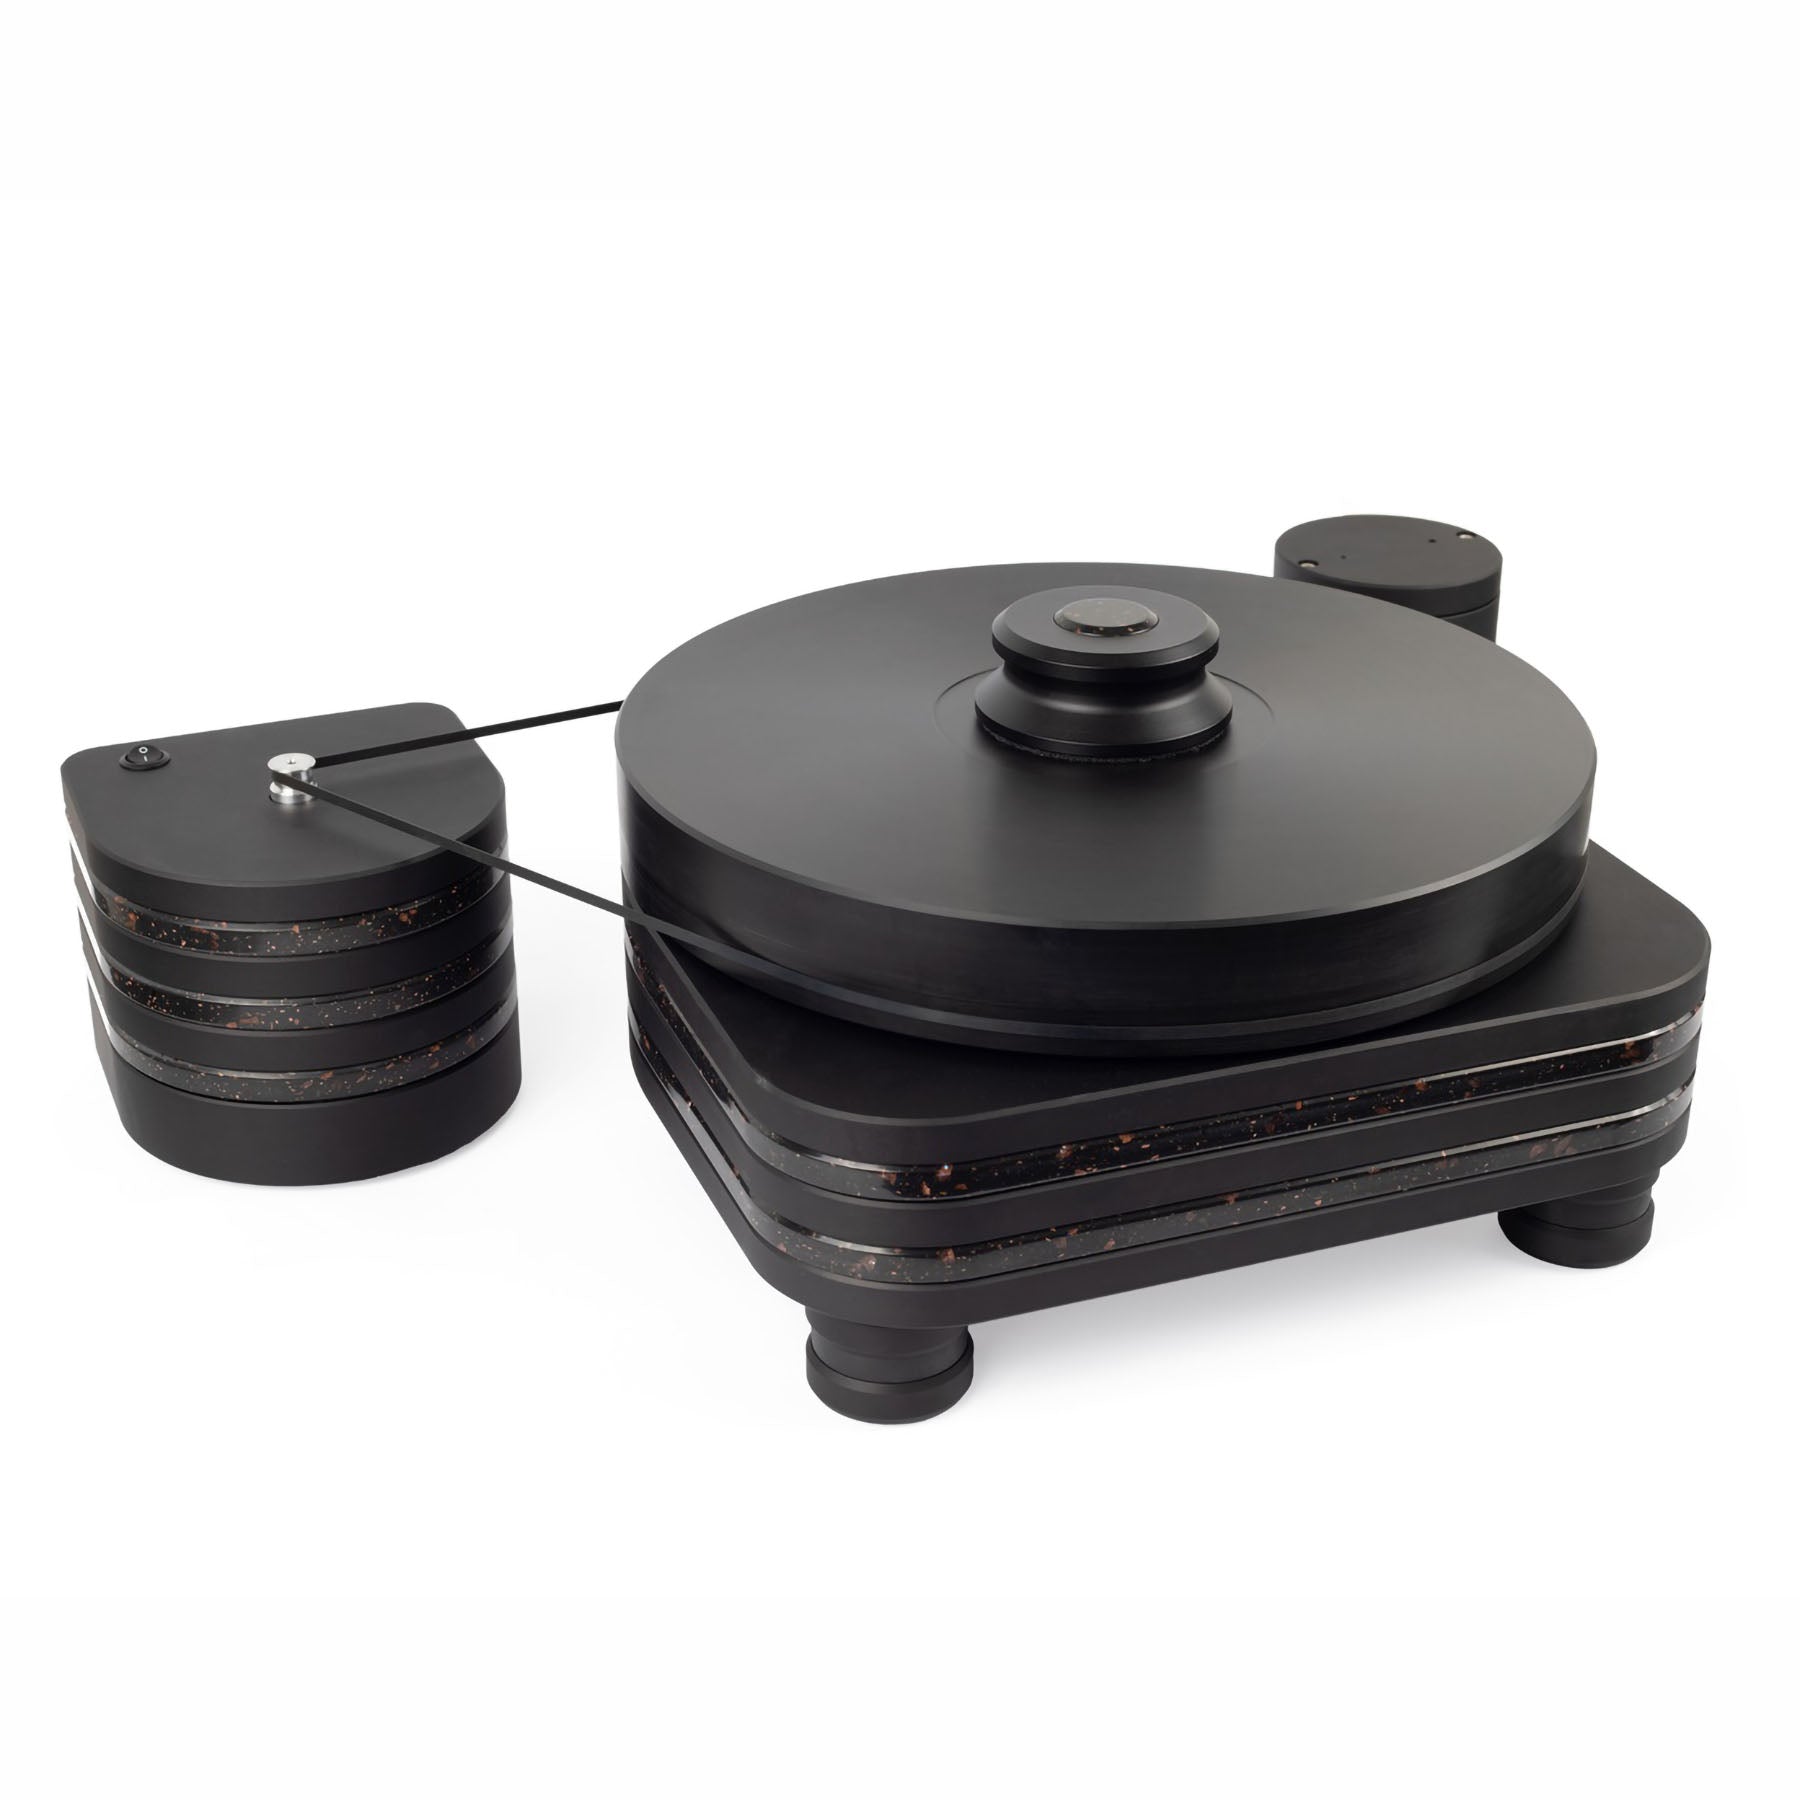 AURIS Bayadere 5 Turntable with W9 Tonearm